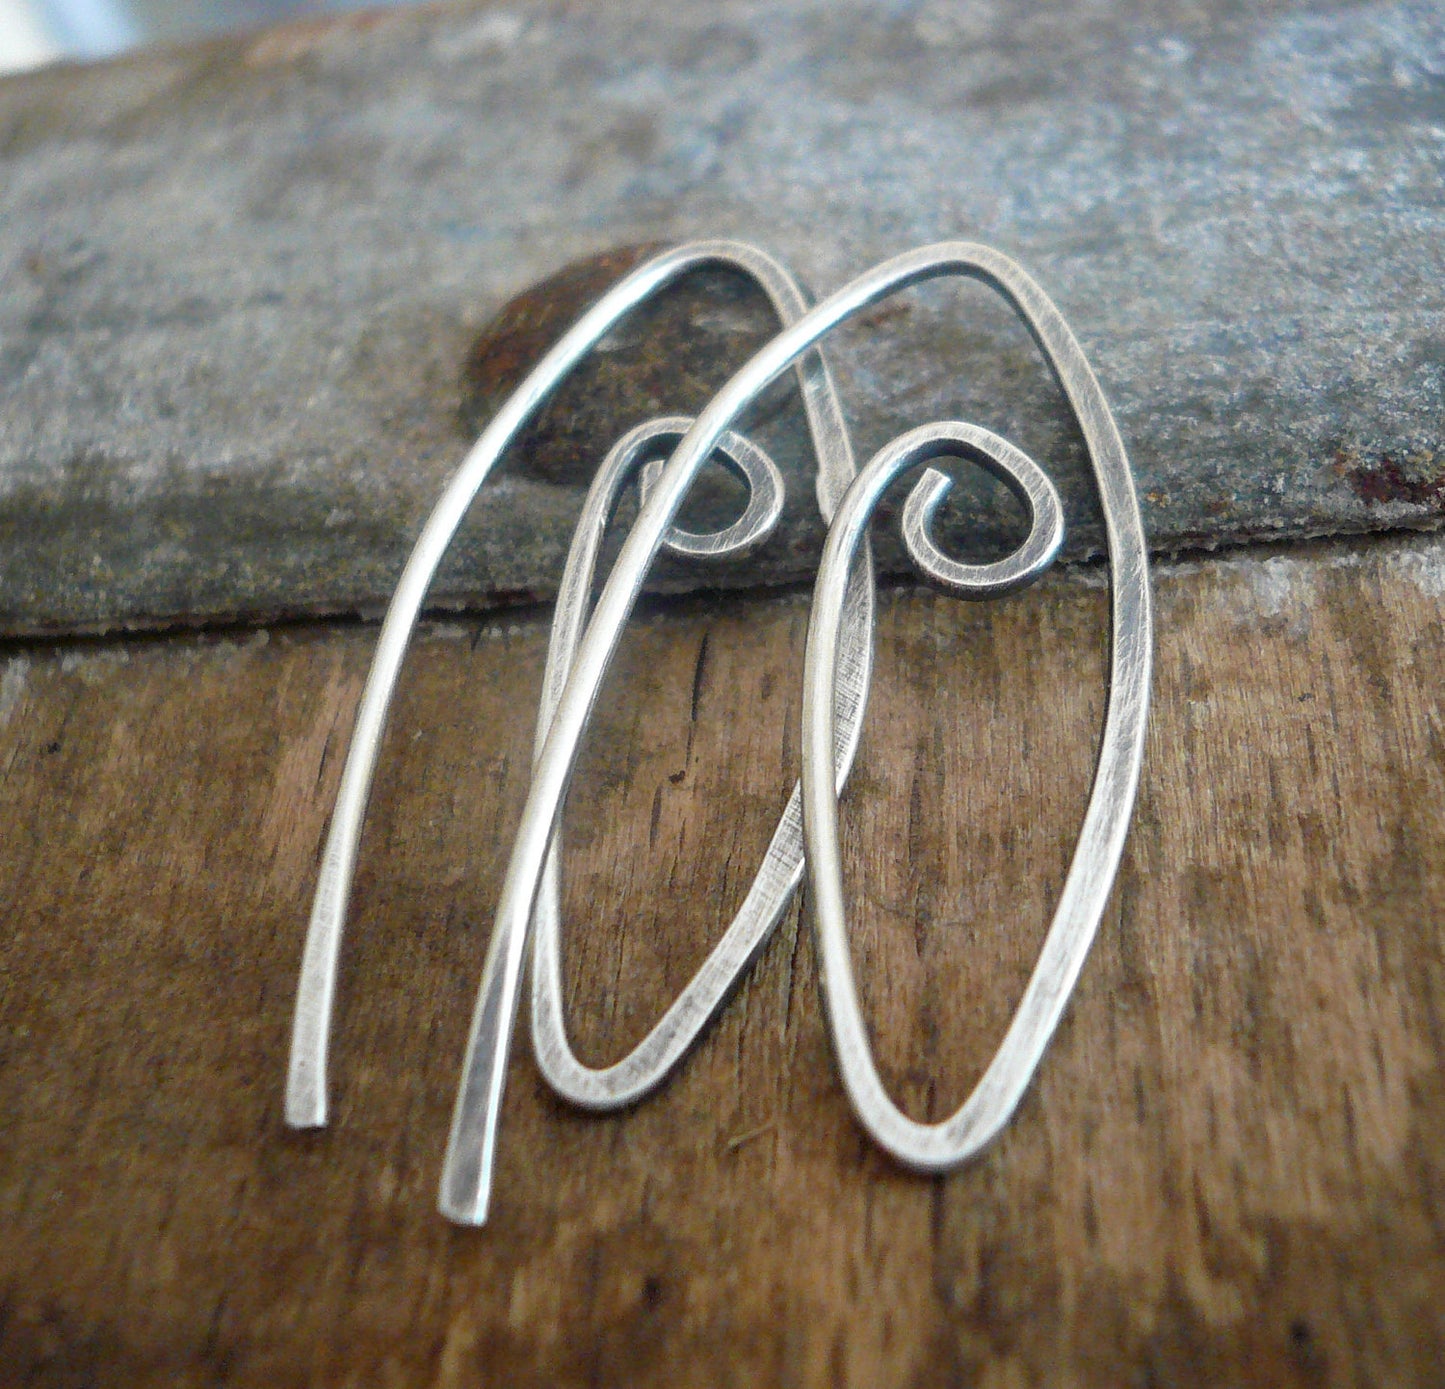 Furl Sterling Silver Earwires - Handmade. Handforged. Oxidized & polished